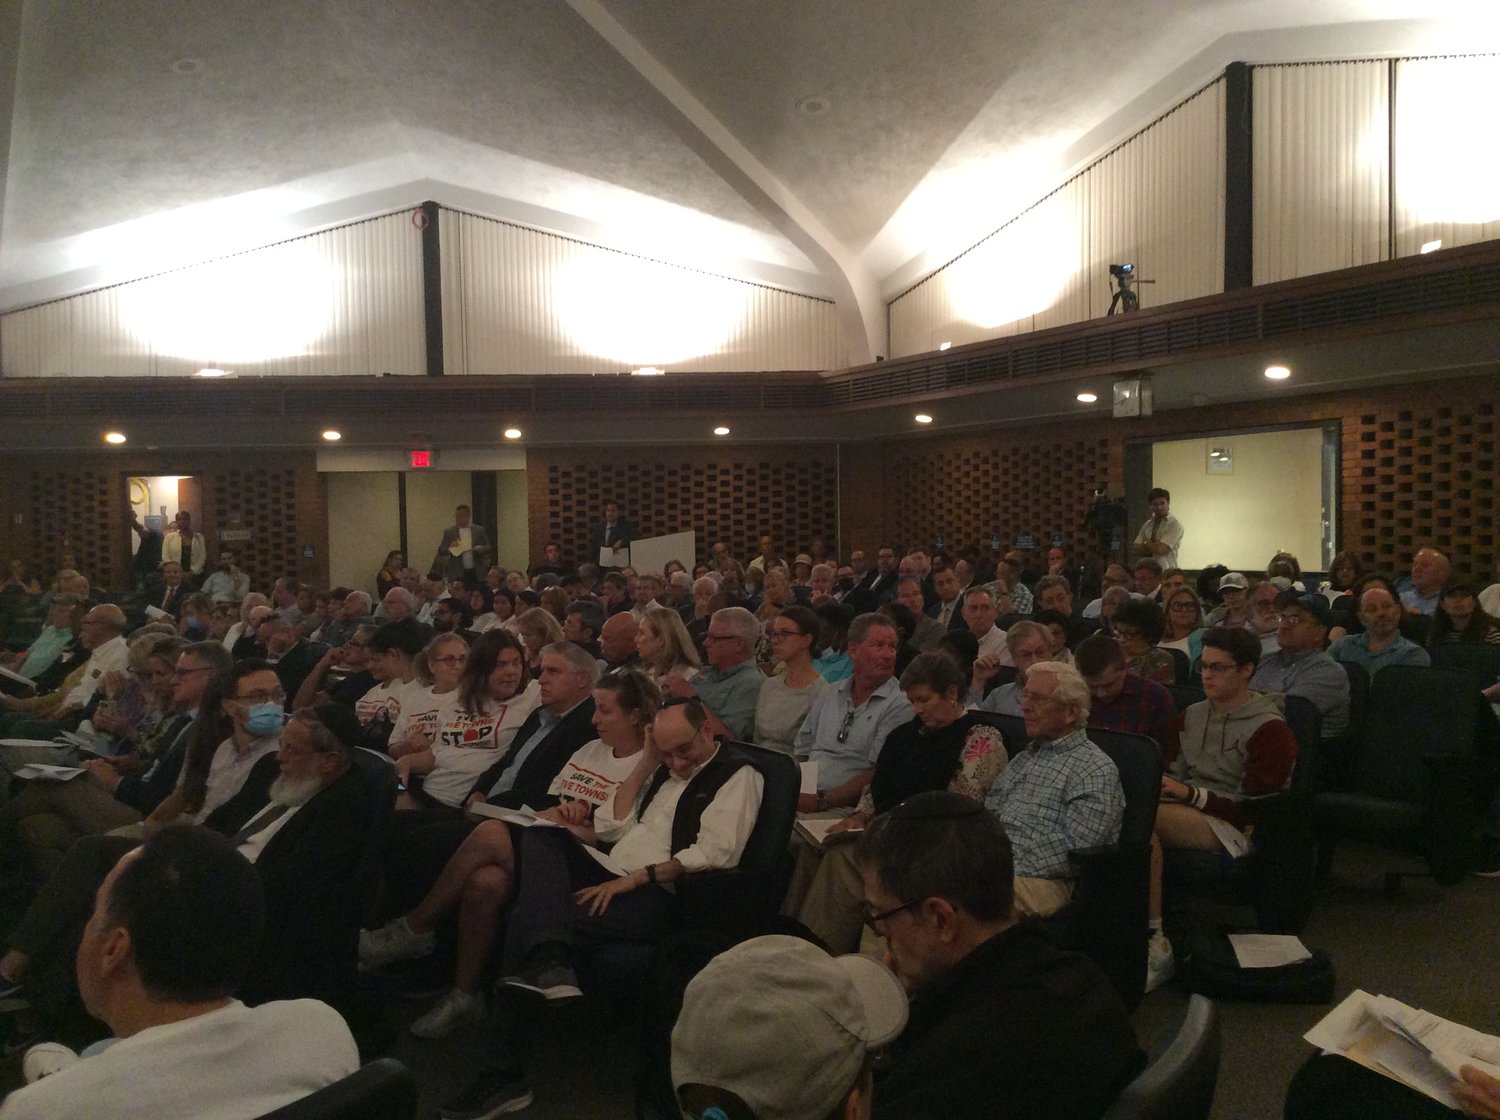 More than 100 Five Towns residents attended the Sept. 20 hearing where the Town of Hempstead approved a temporary ban on building in those communities.